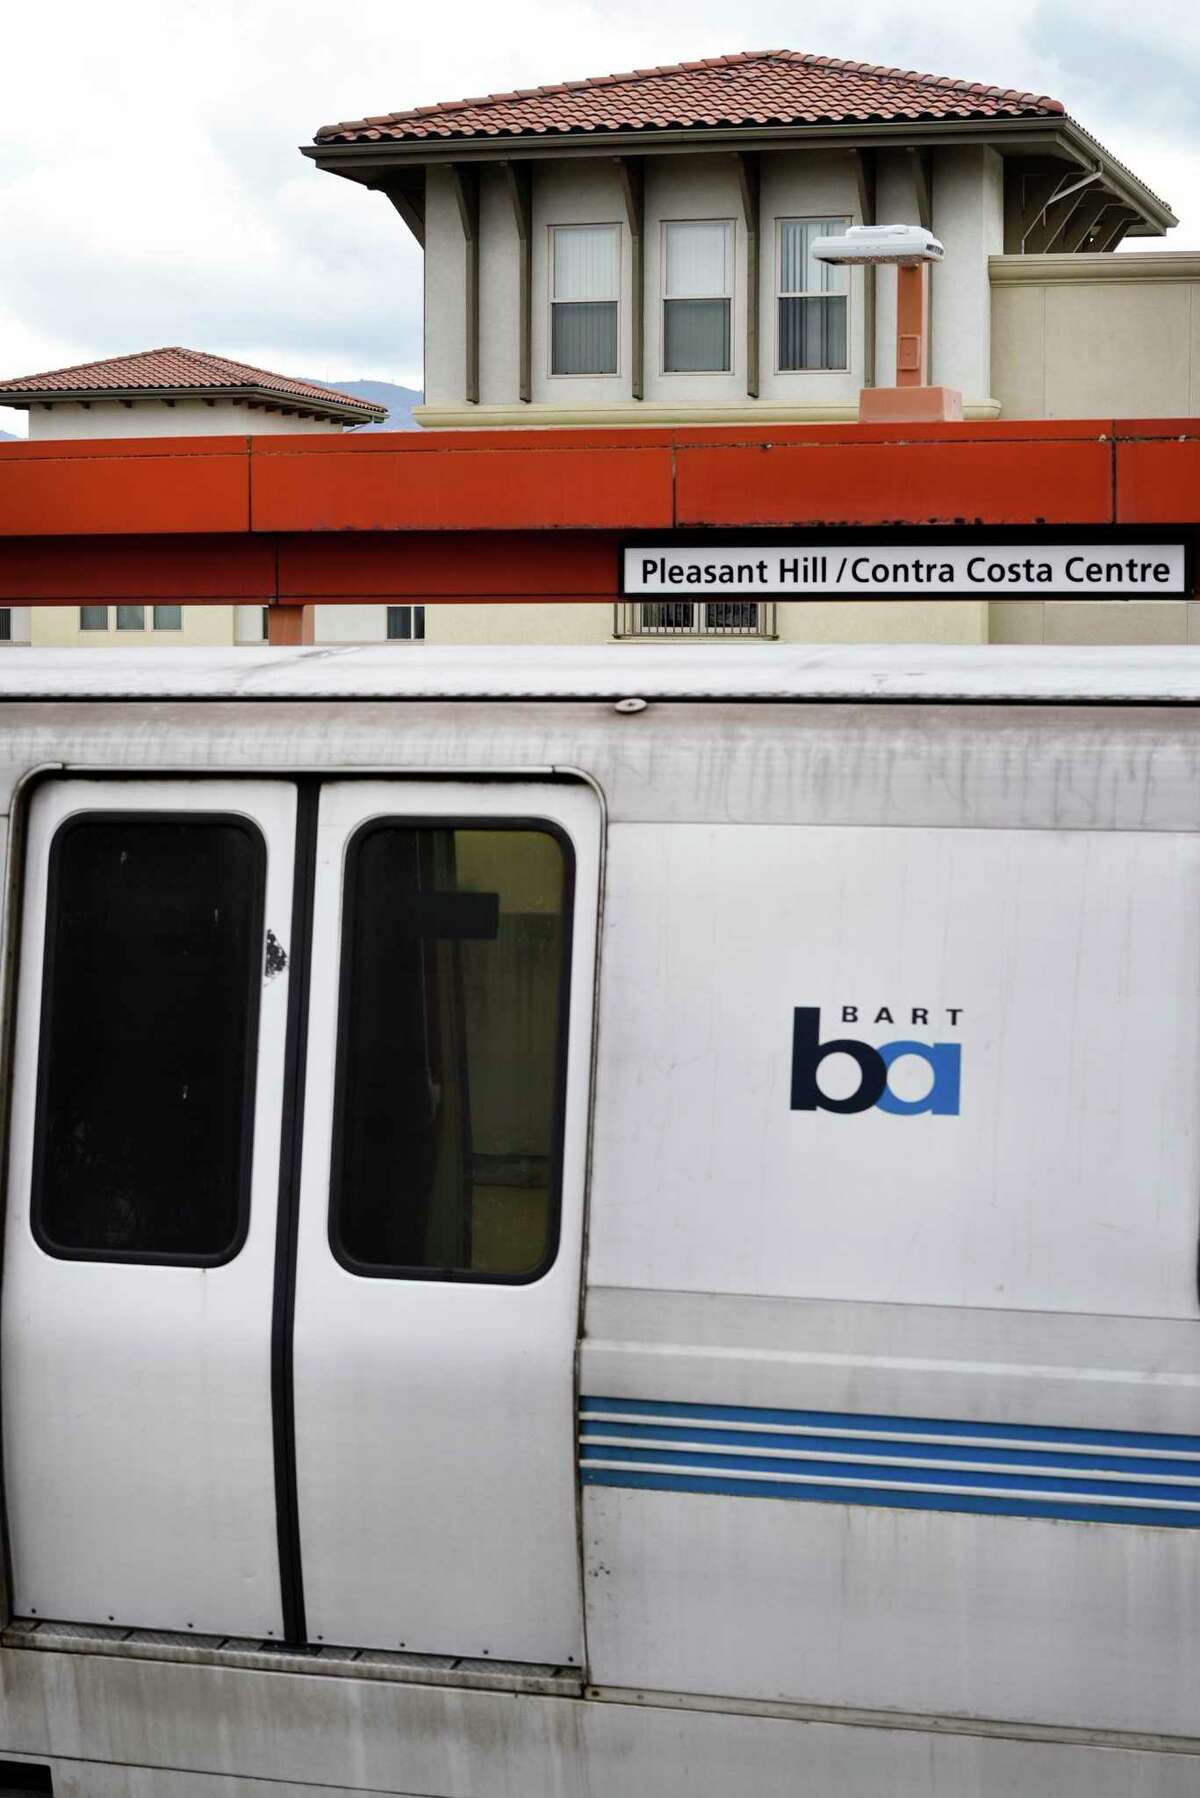 A BART train derailed in the East Bay between Concord and Pleasant Hill, causing evacuation of passengers. A train here is seen at the Pleasant Hill Station in 2018.